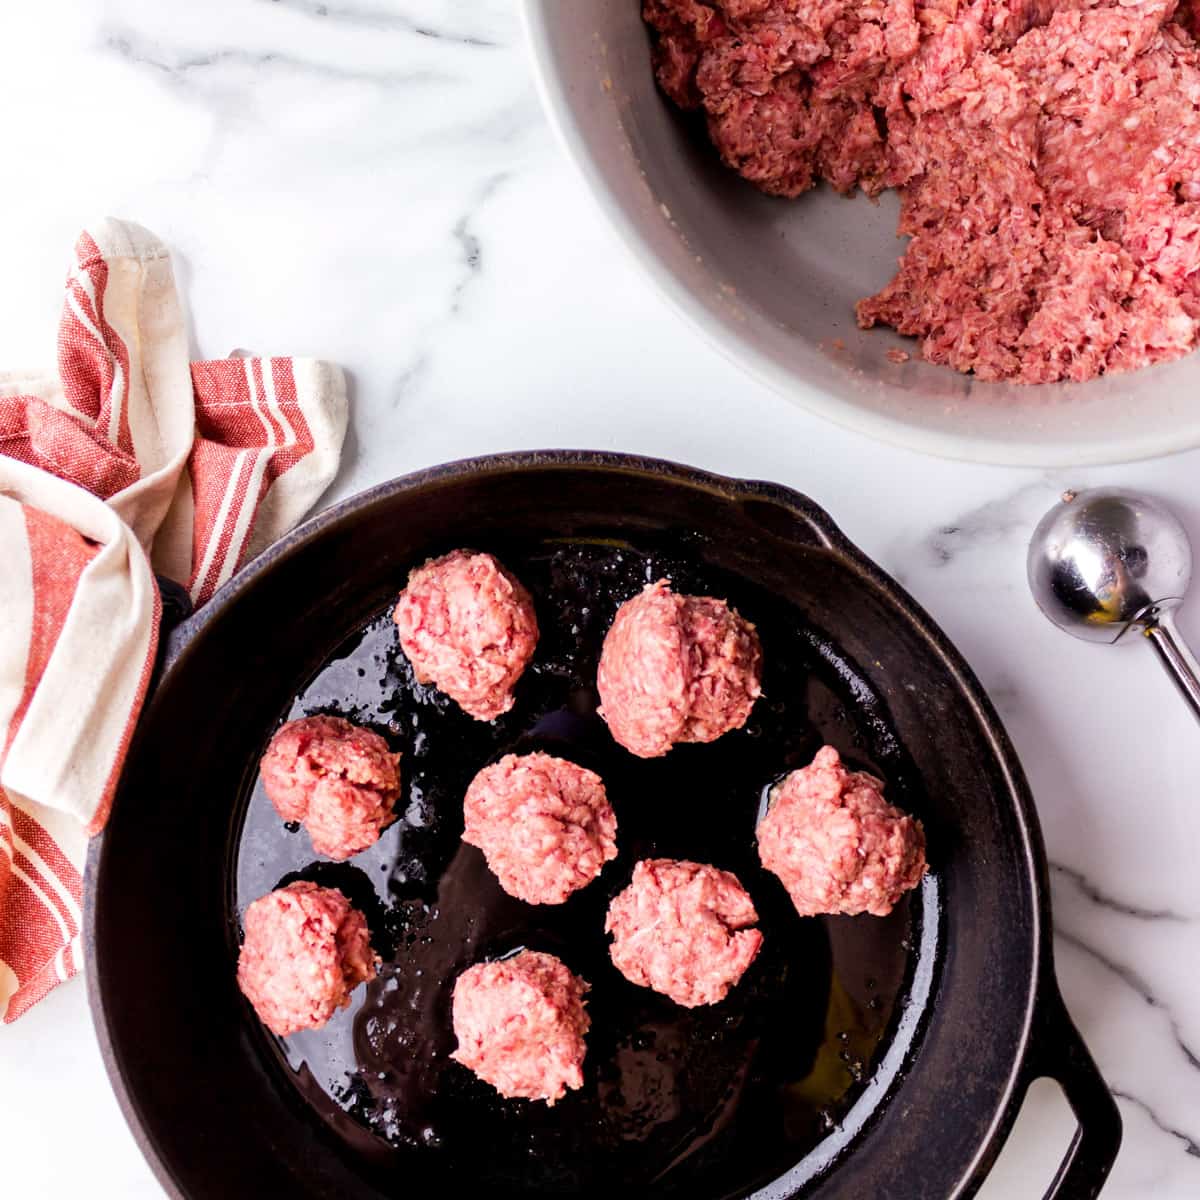 Meatballs frying in skillet with bowl of ground beef and cookie scoop on the side.